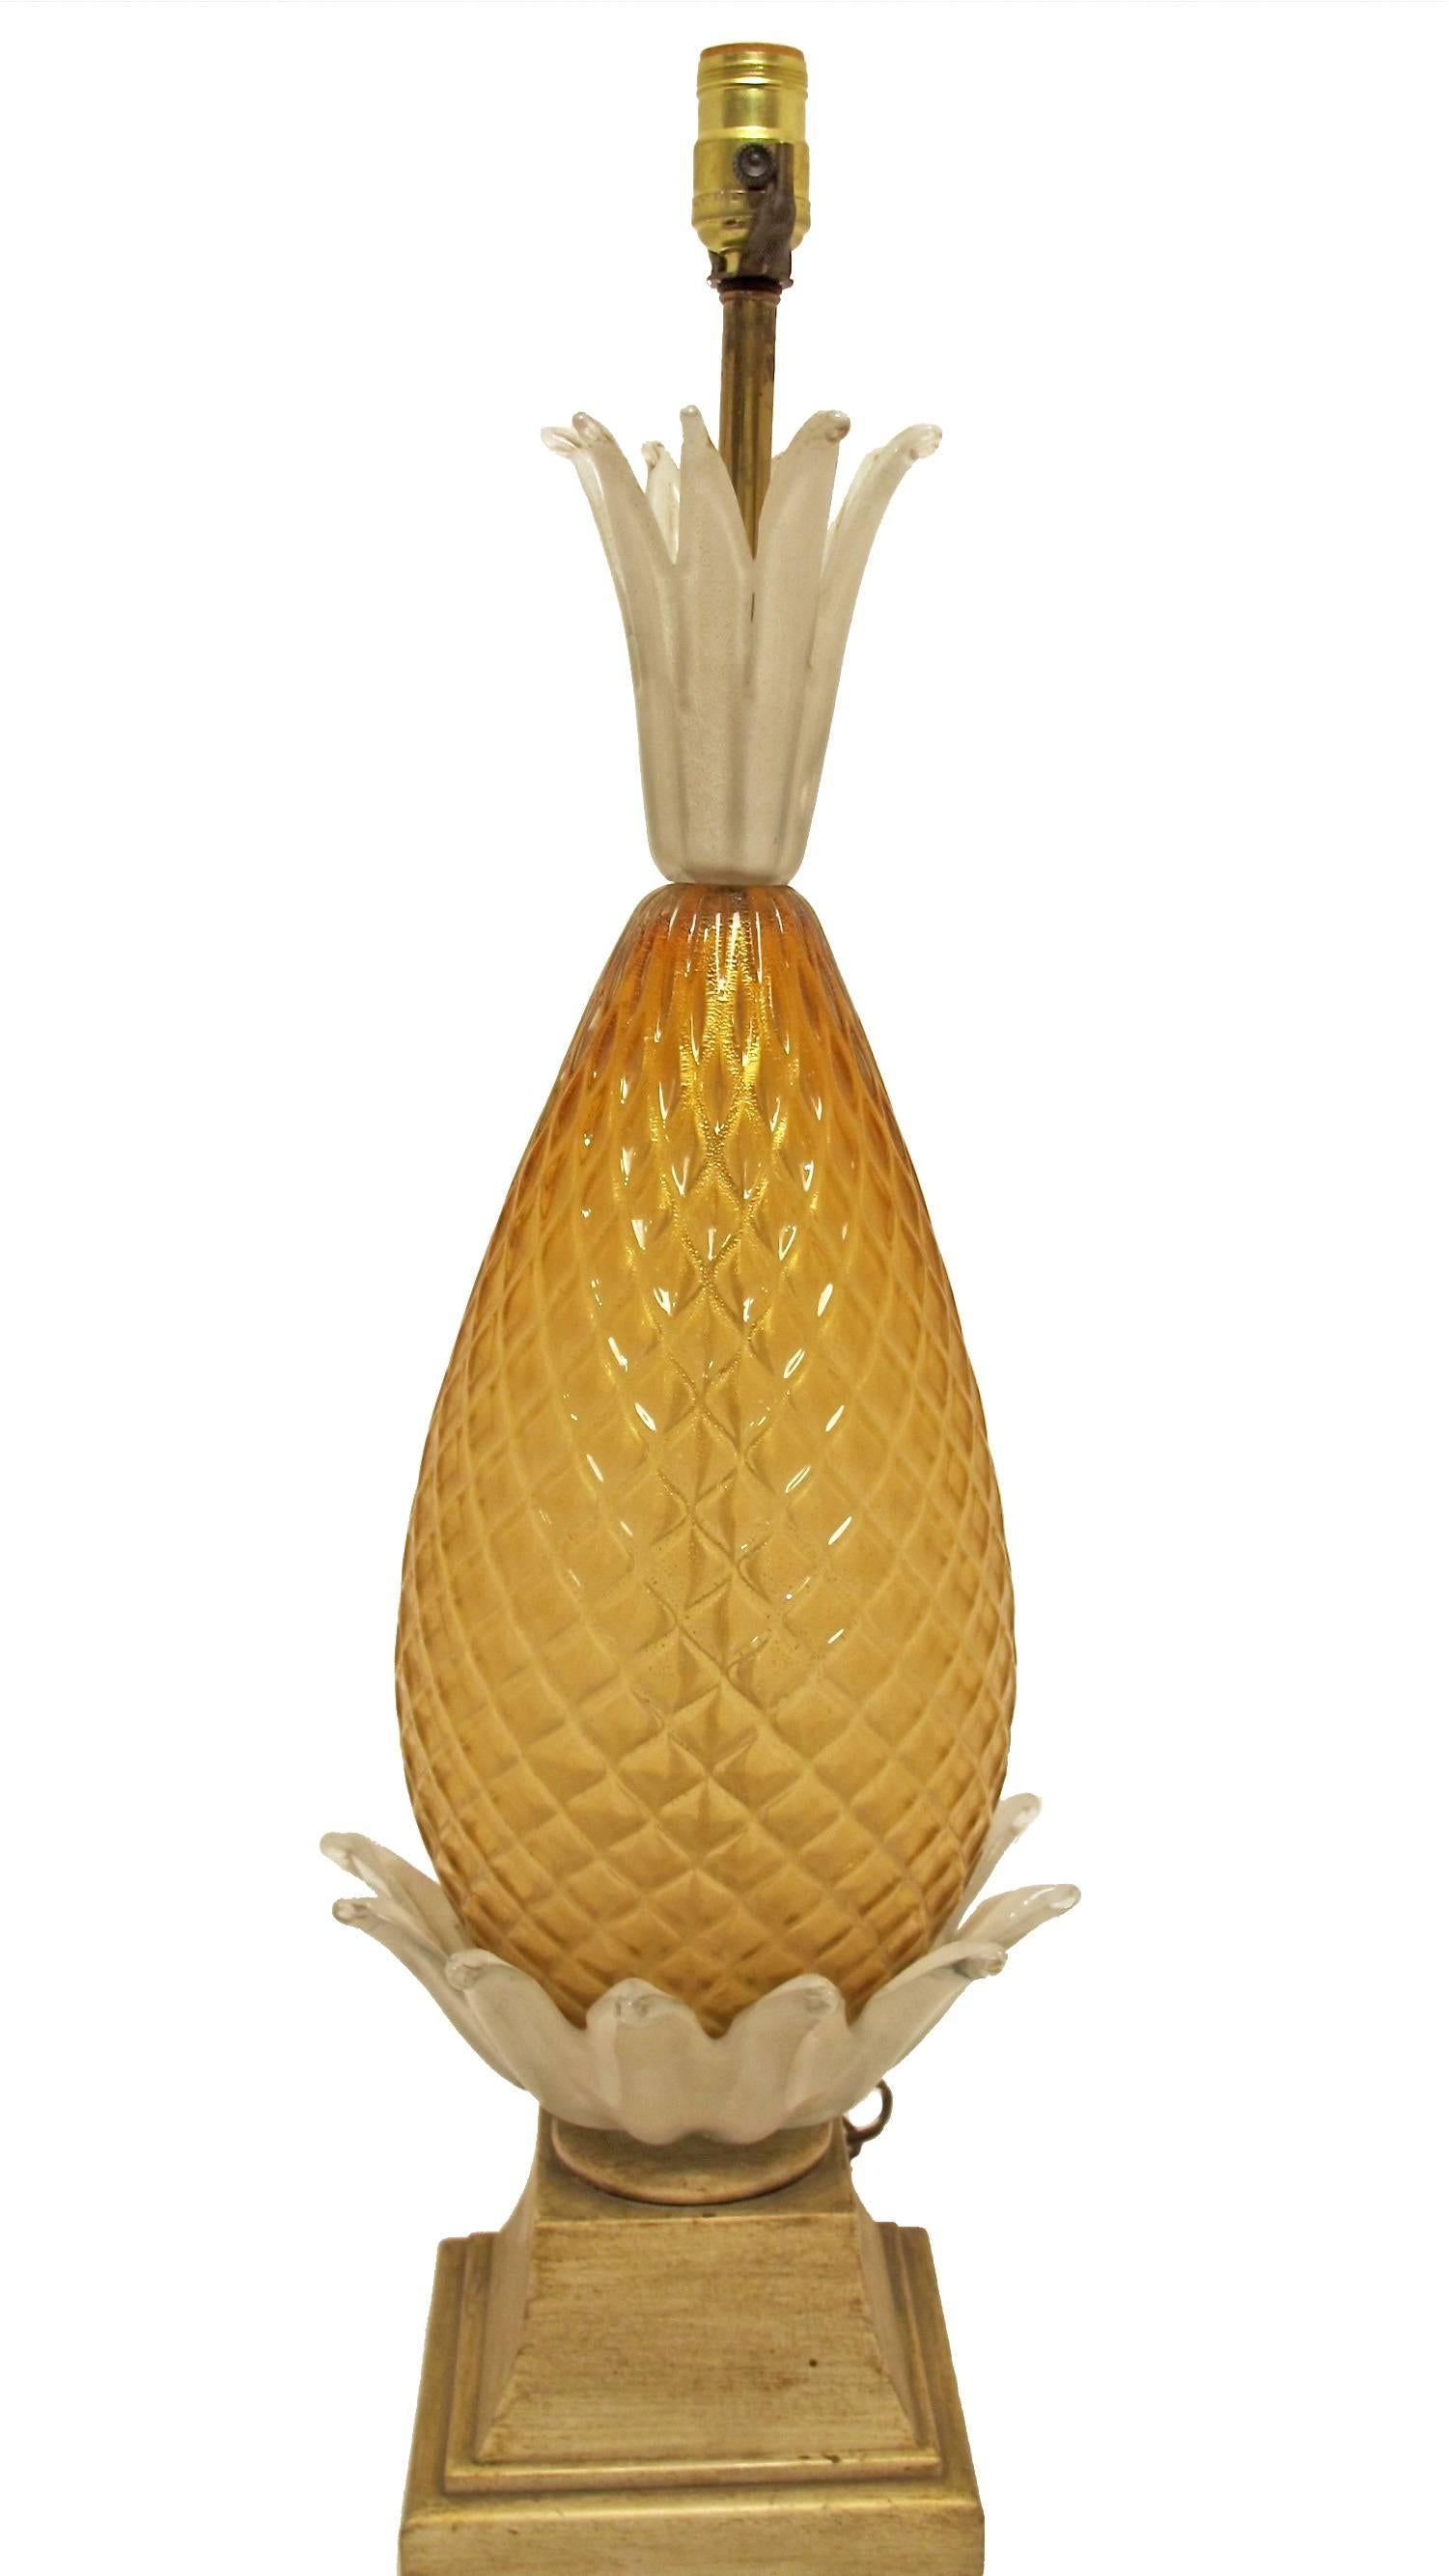 Large impressive Italian glass lamp in the shape of a pineapple on painted wood plinth. Attributed to Barovier & Toss, Italy, mid-20th century. Newly re-wired.